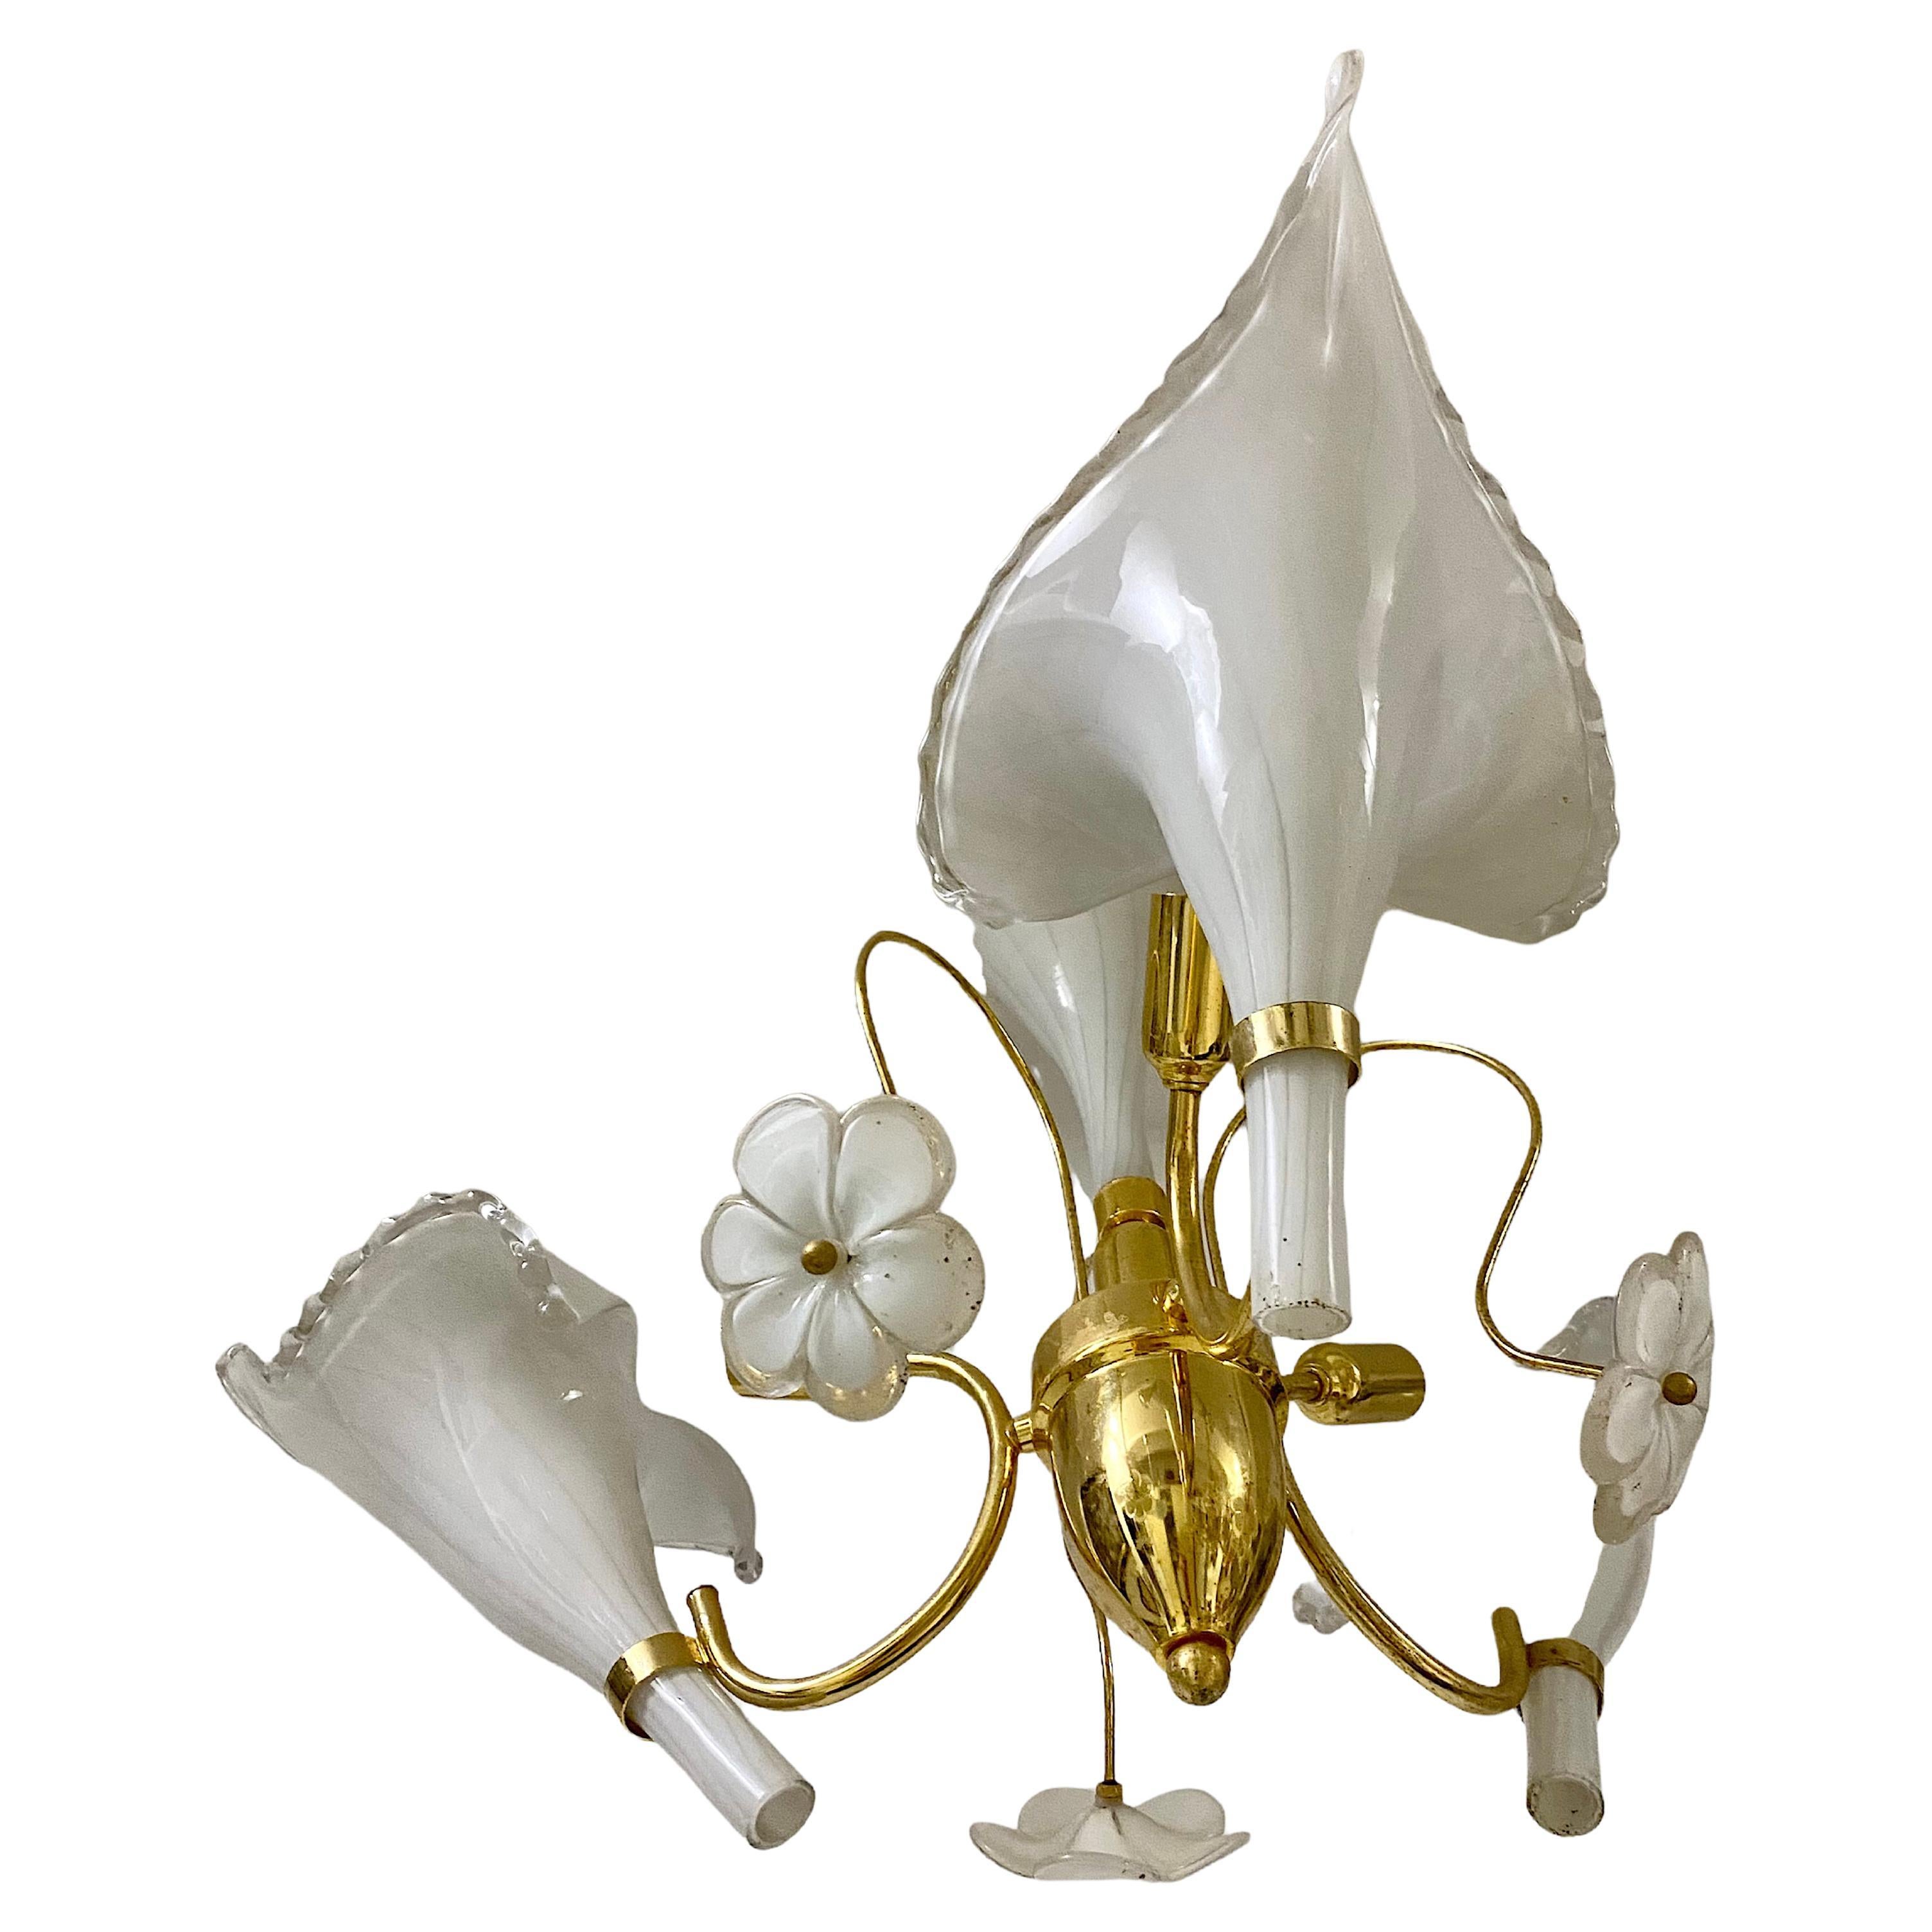 Franco Luce Chandelier Glace Murano with Large Leaves, Italy, 1980